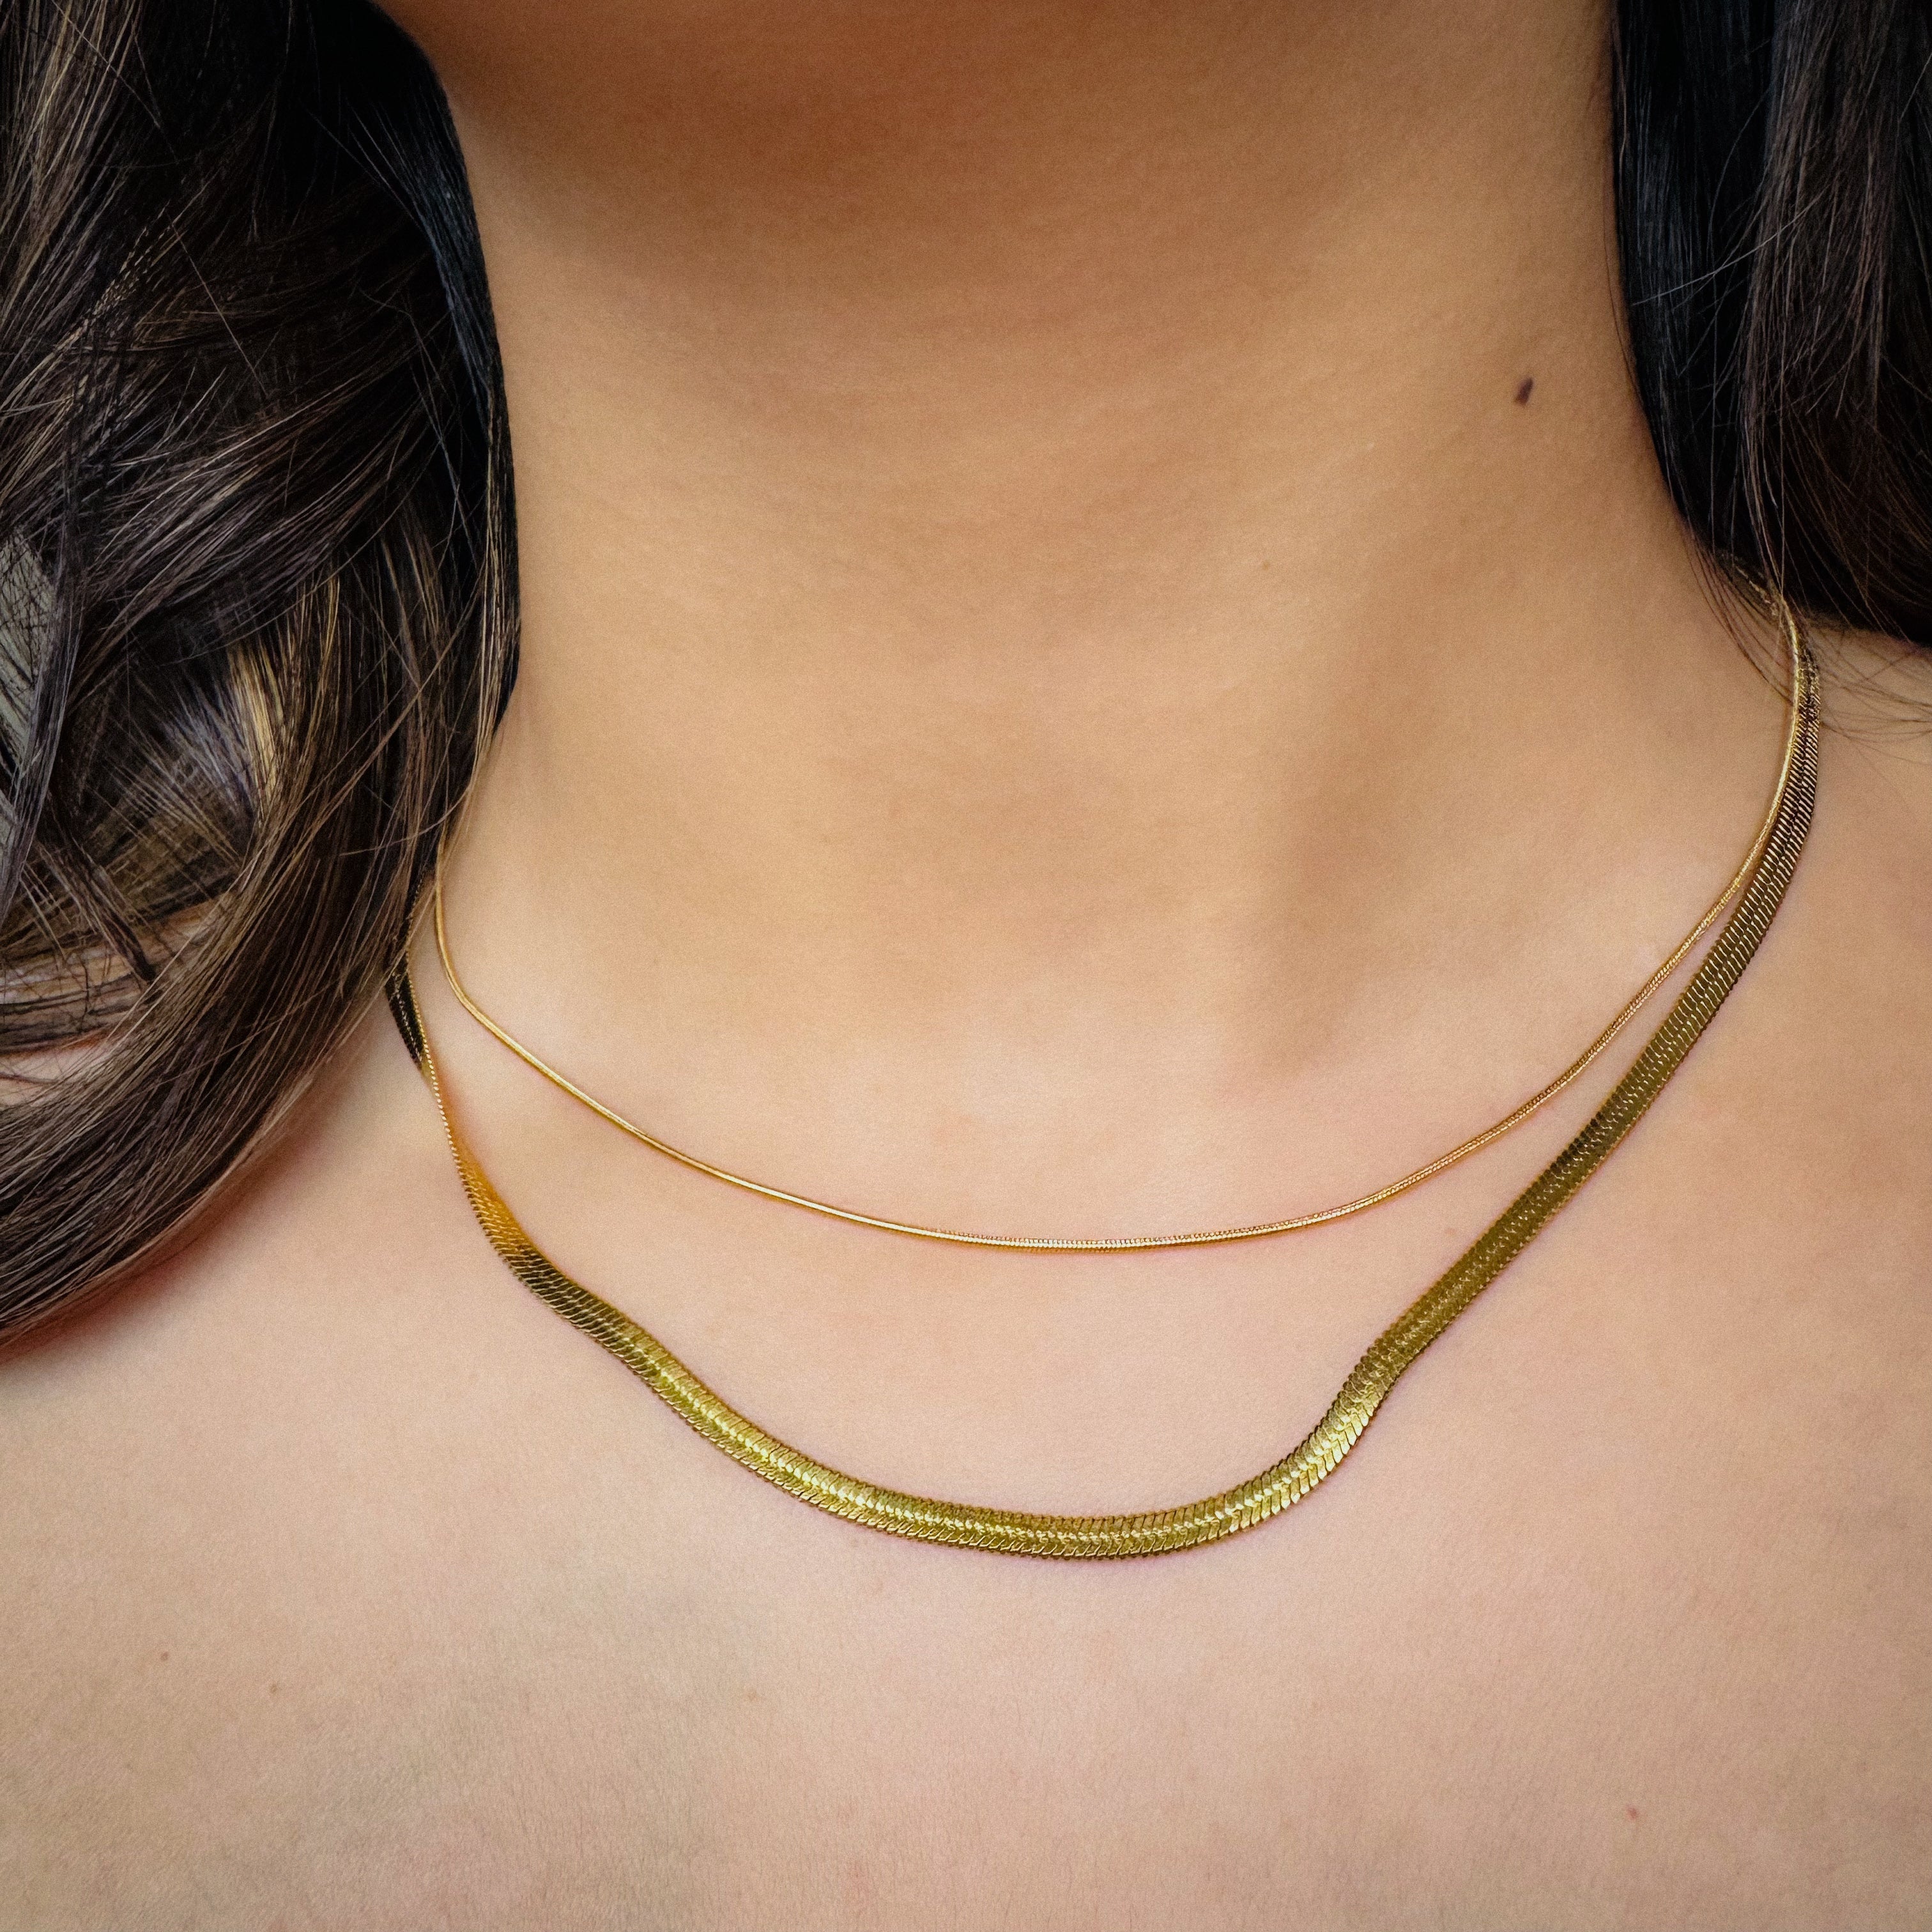 Tewiky Herringbone Necklace for Women Dainty 14k Gold Snake Chain Necklace  Layered Gold Herringbone Double Flat Snake Chain Choker Necklace Thin  Chunky Chain Necklace Gift for Her : Amazon.co.uk: Fashion